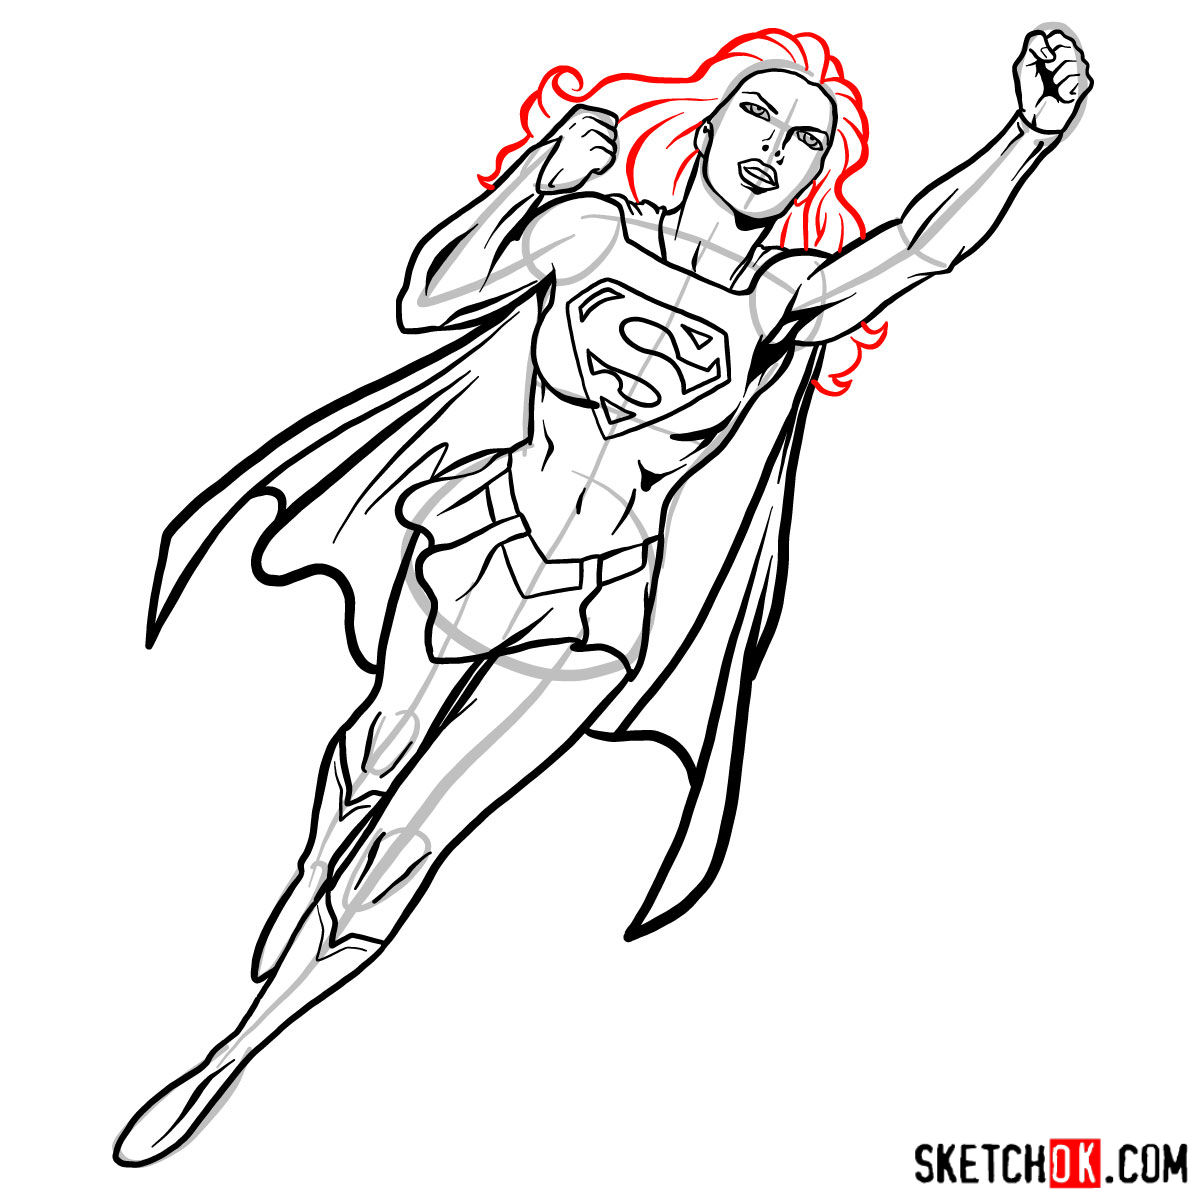 How to draw Supergirl in flight - step 13